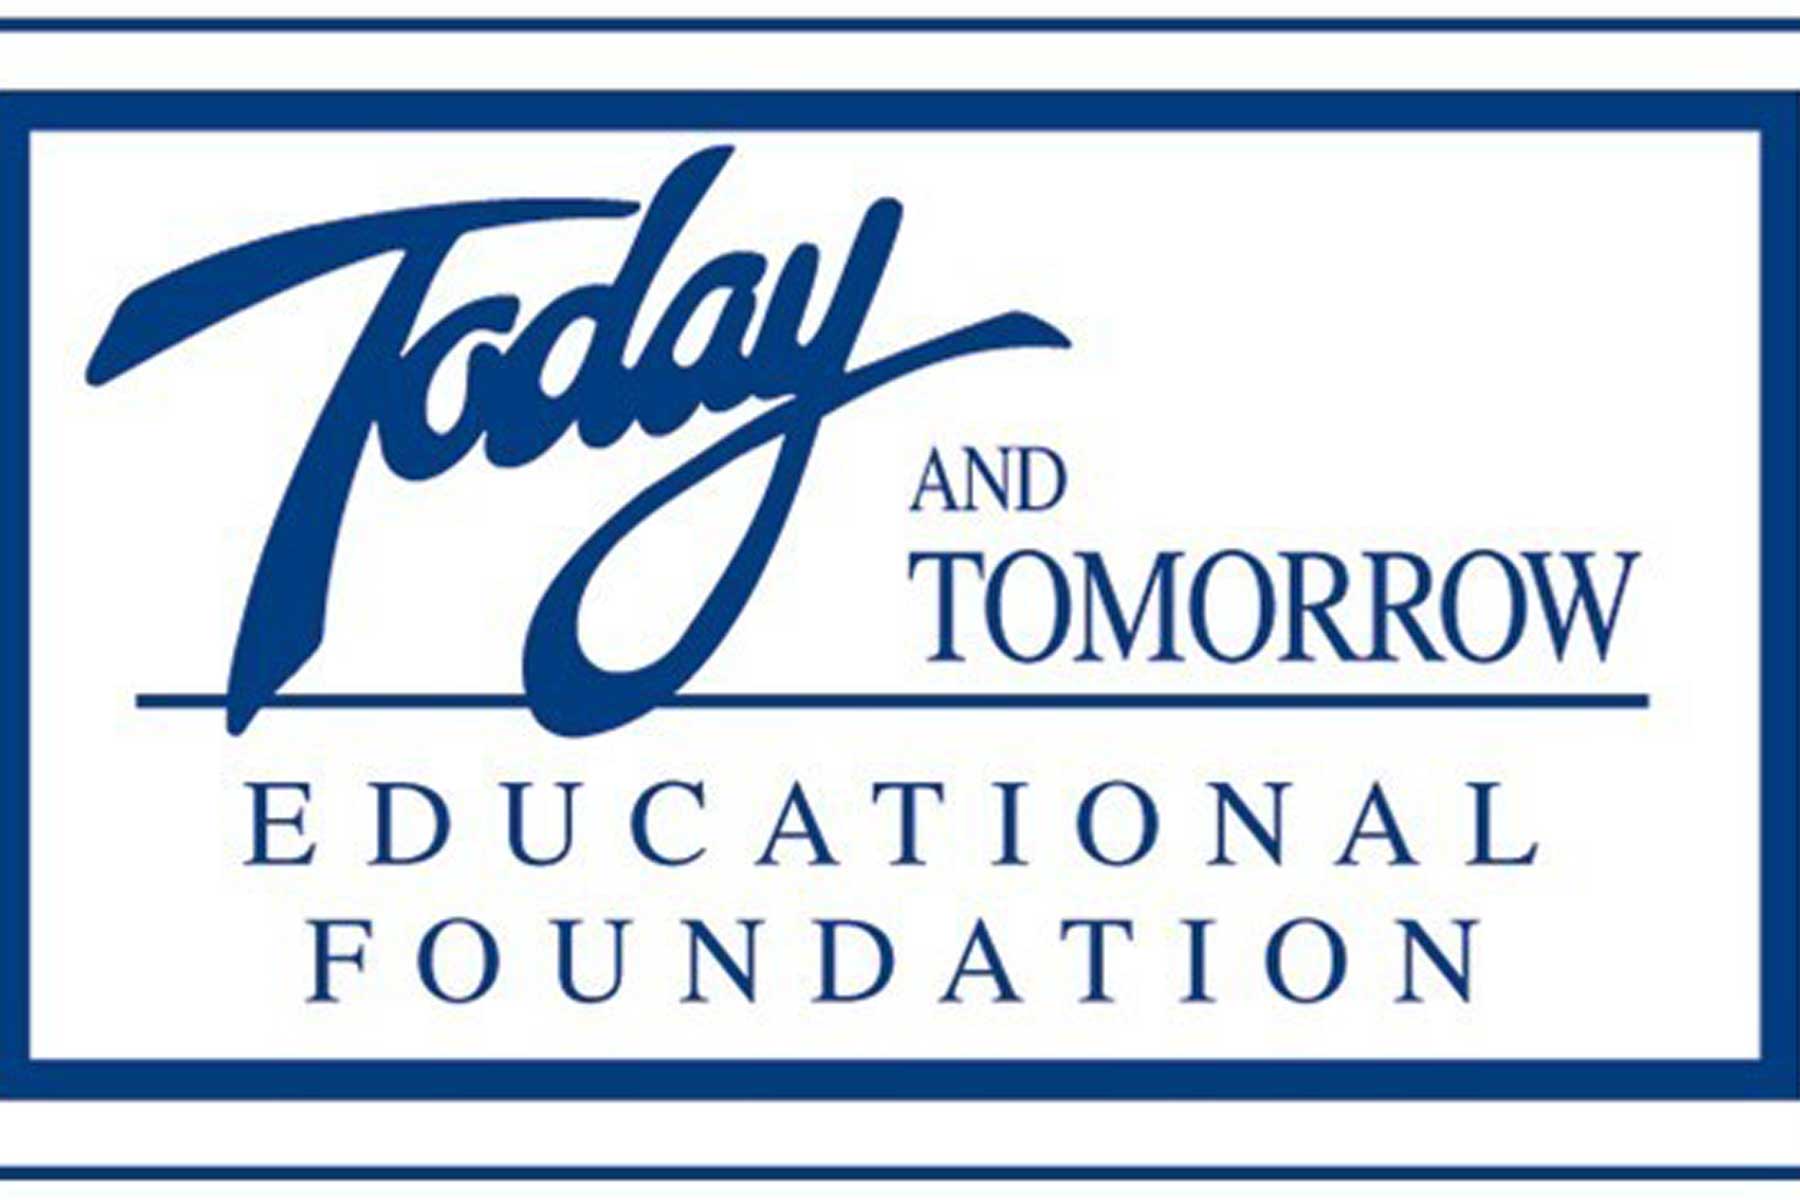 Today and Tomorrow Educational Foundation